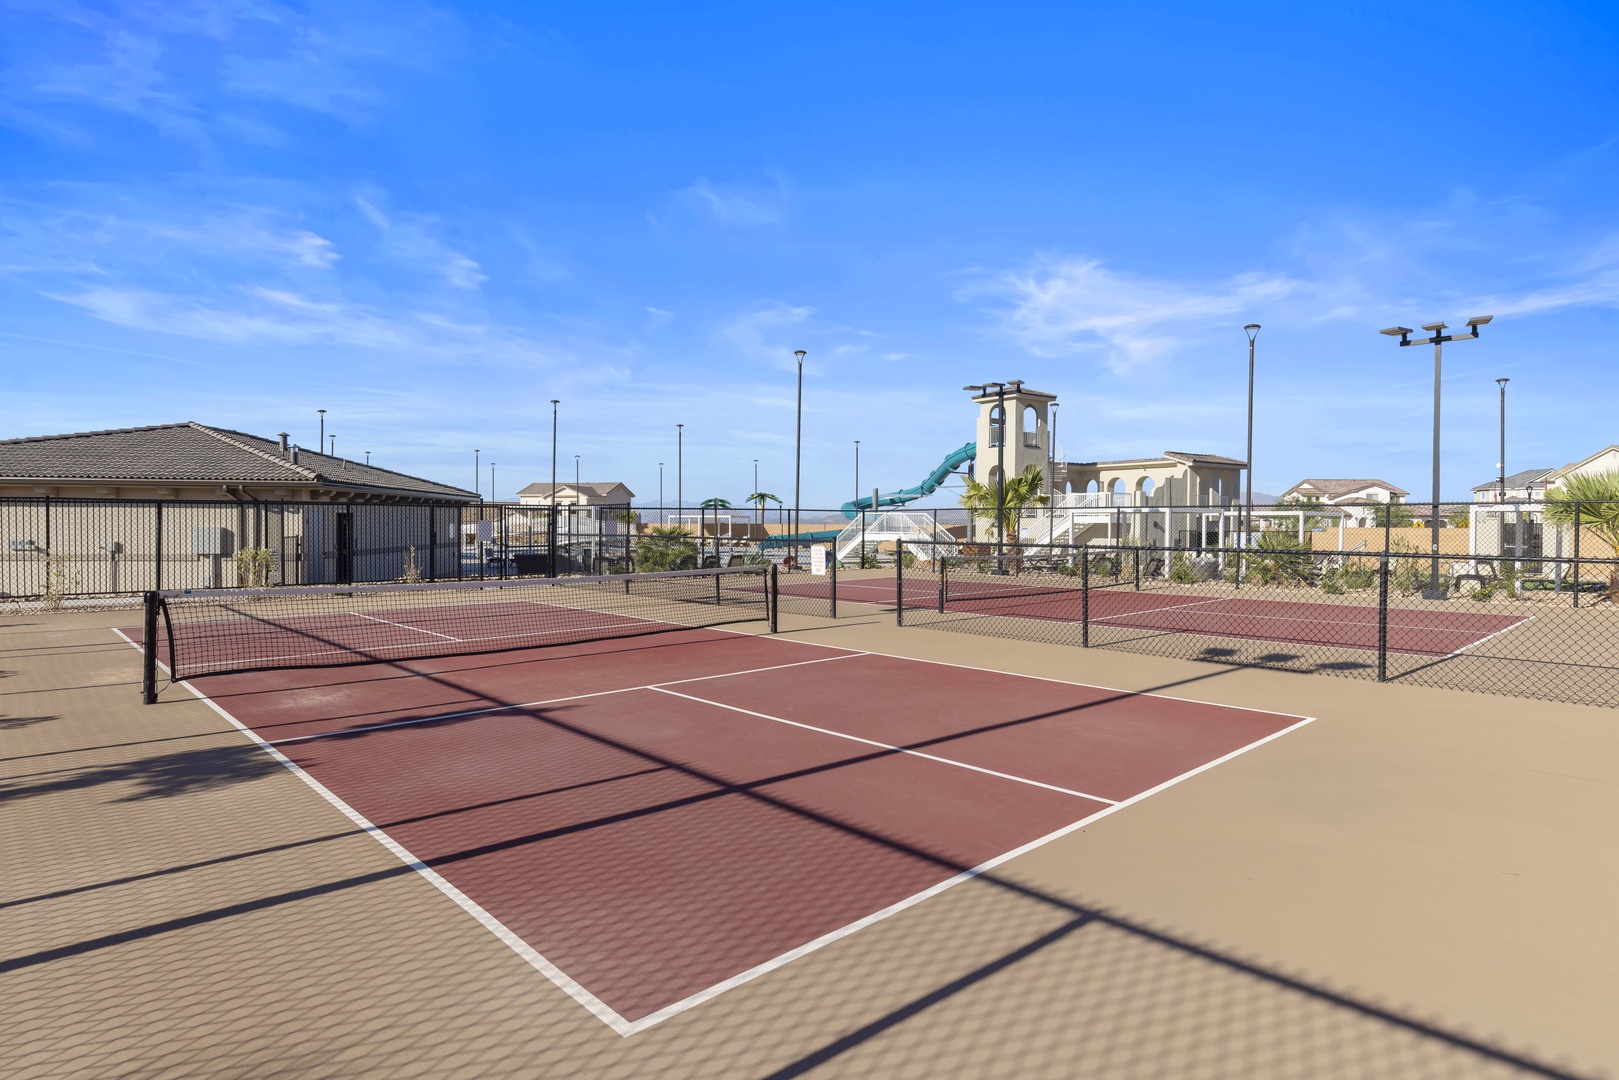 Pickleball courts accessible - equipment not included